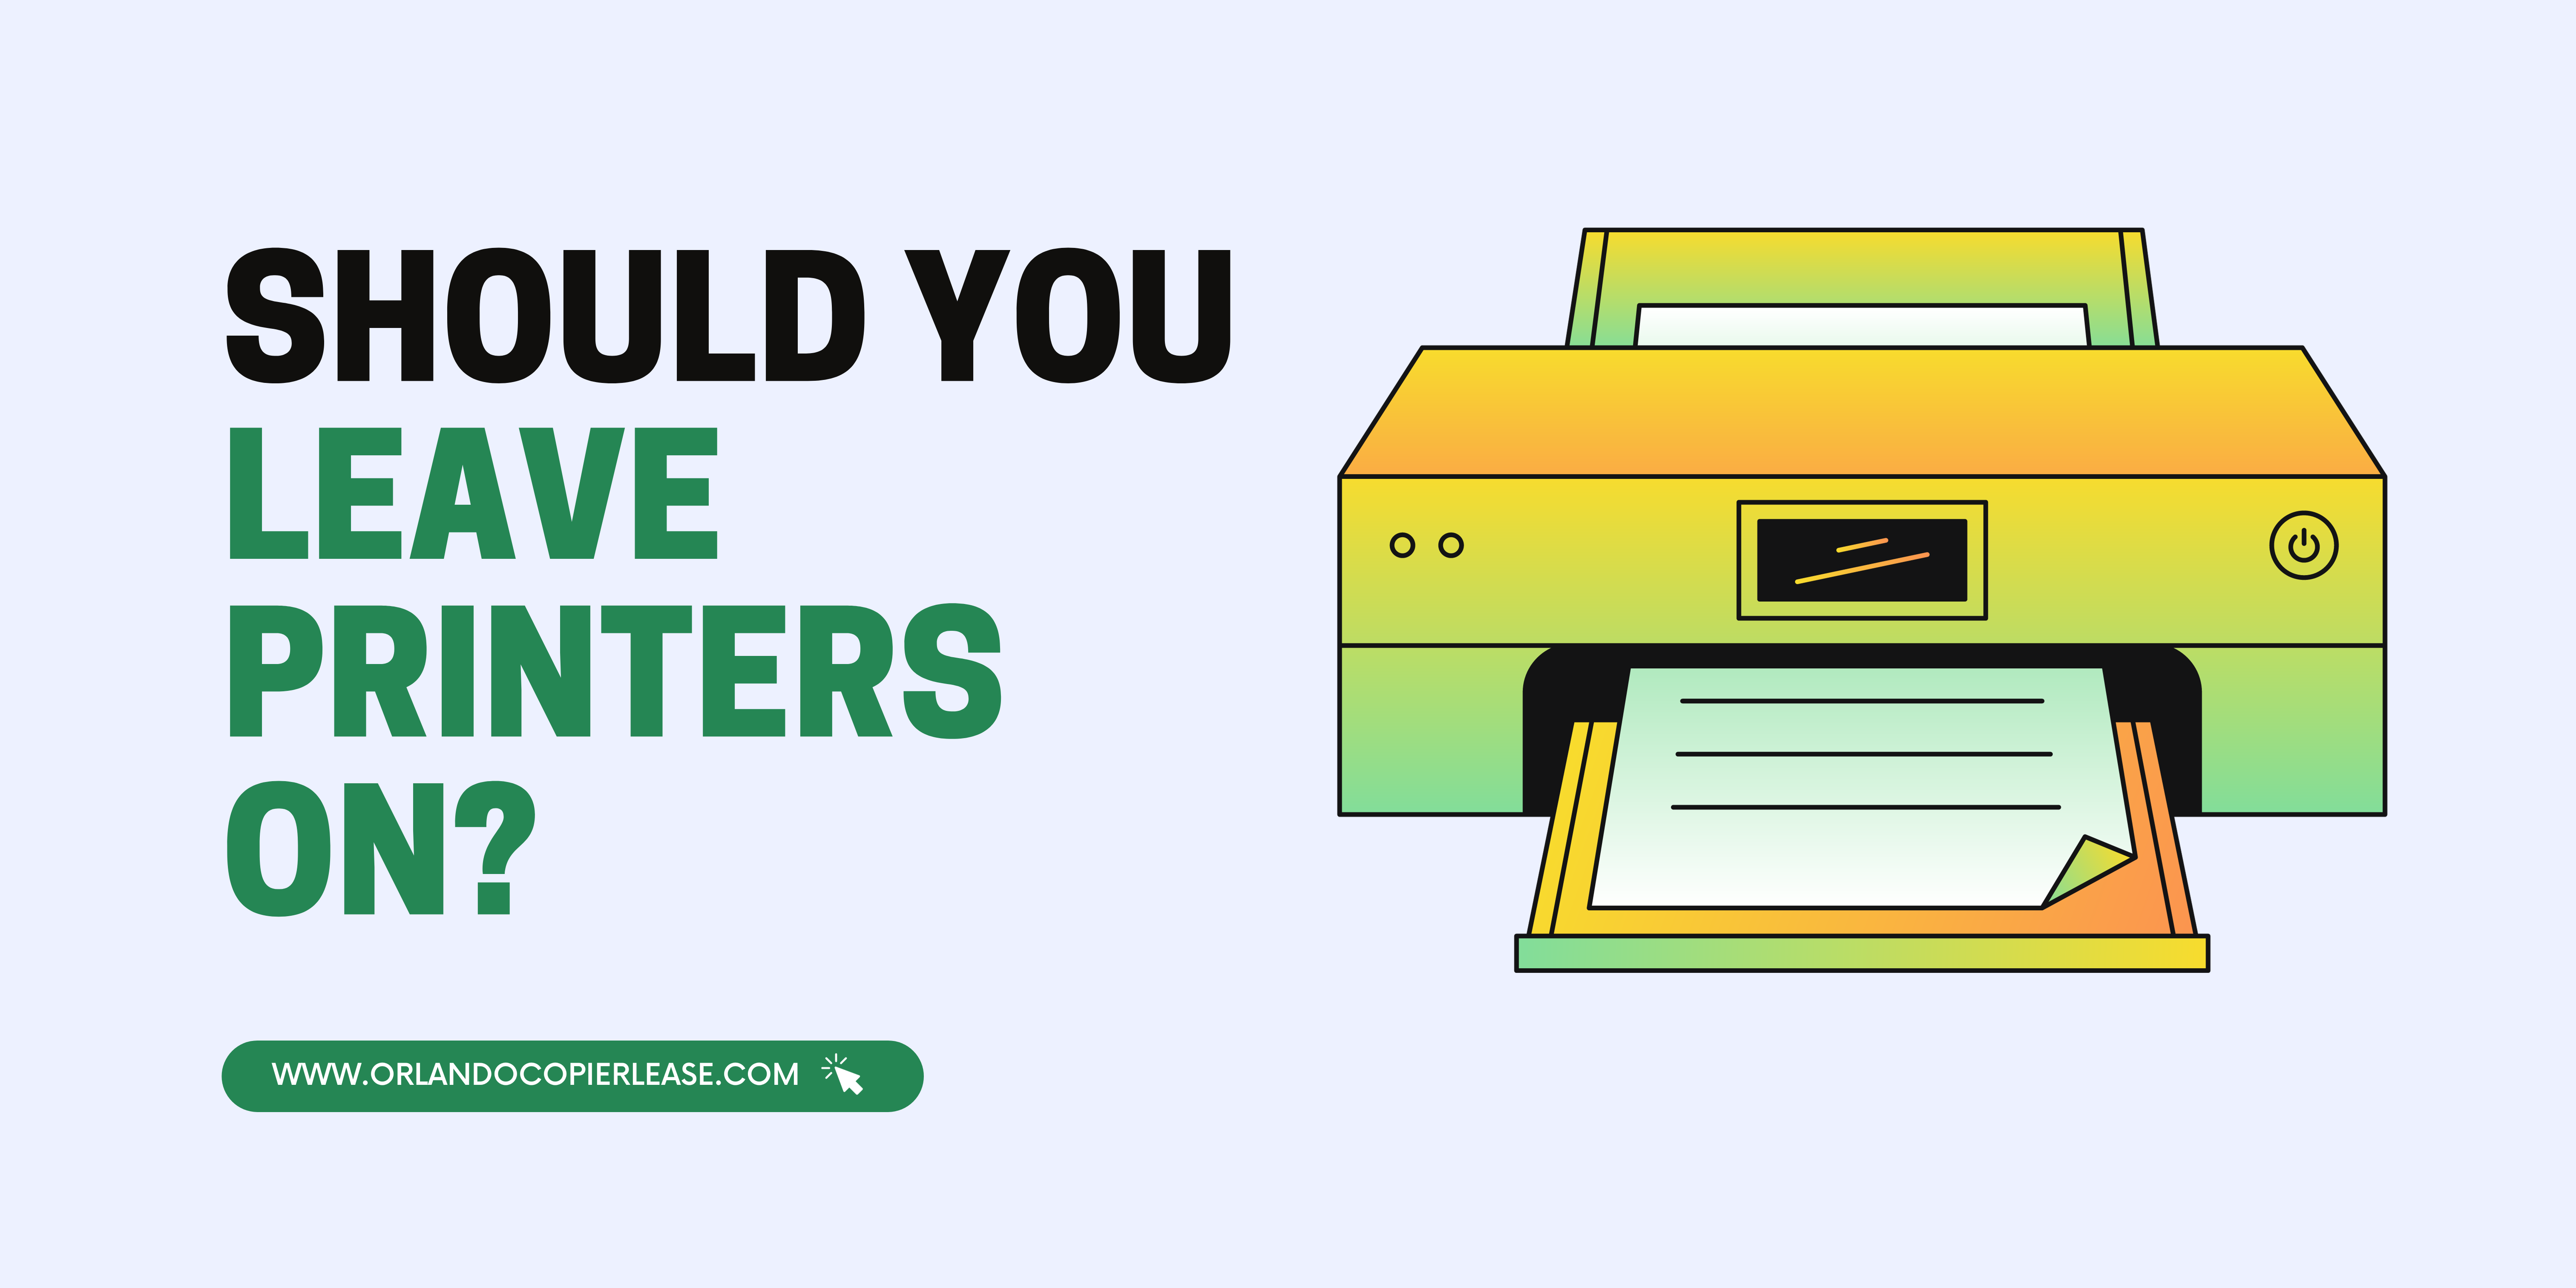 Should You Leave Printers On?